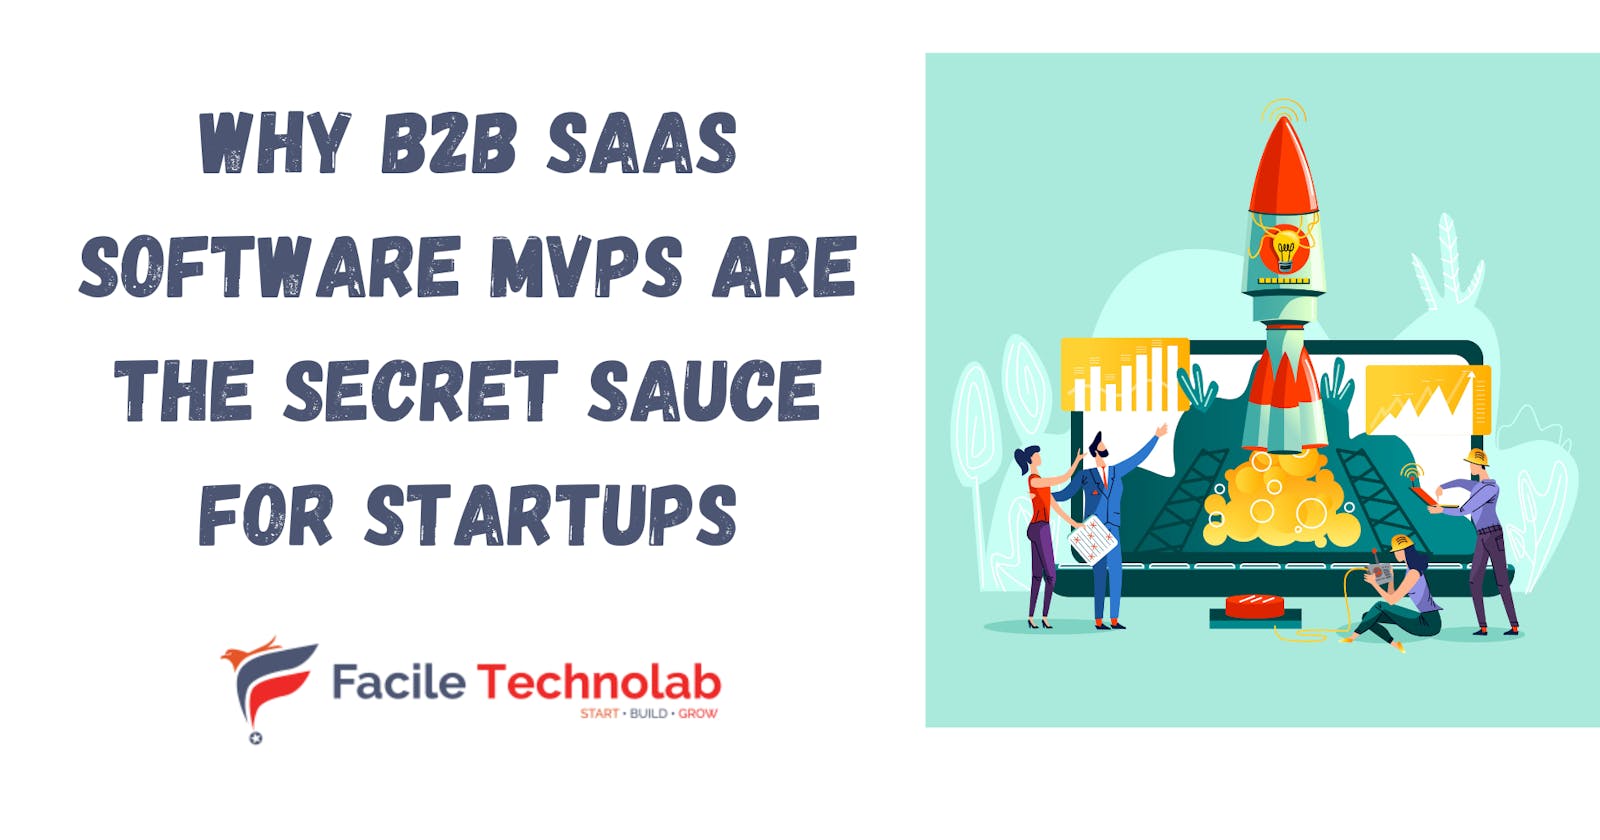 Why B2B SaaS Software MVPs are the Secret Sauce for Startups